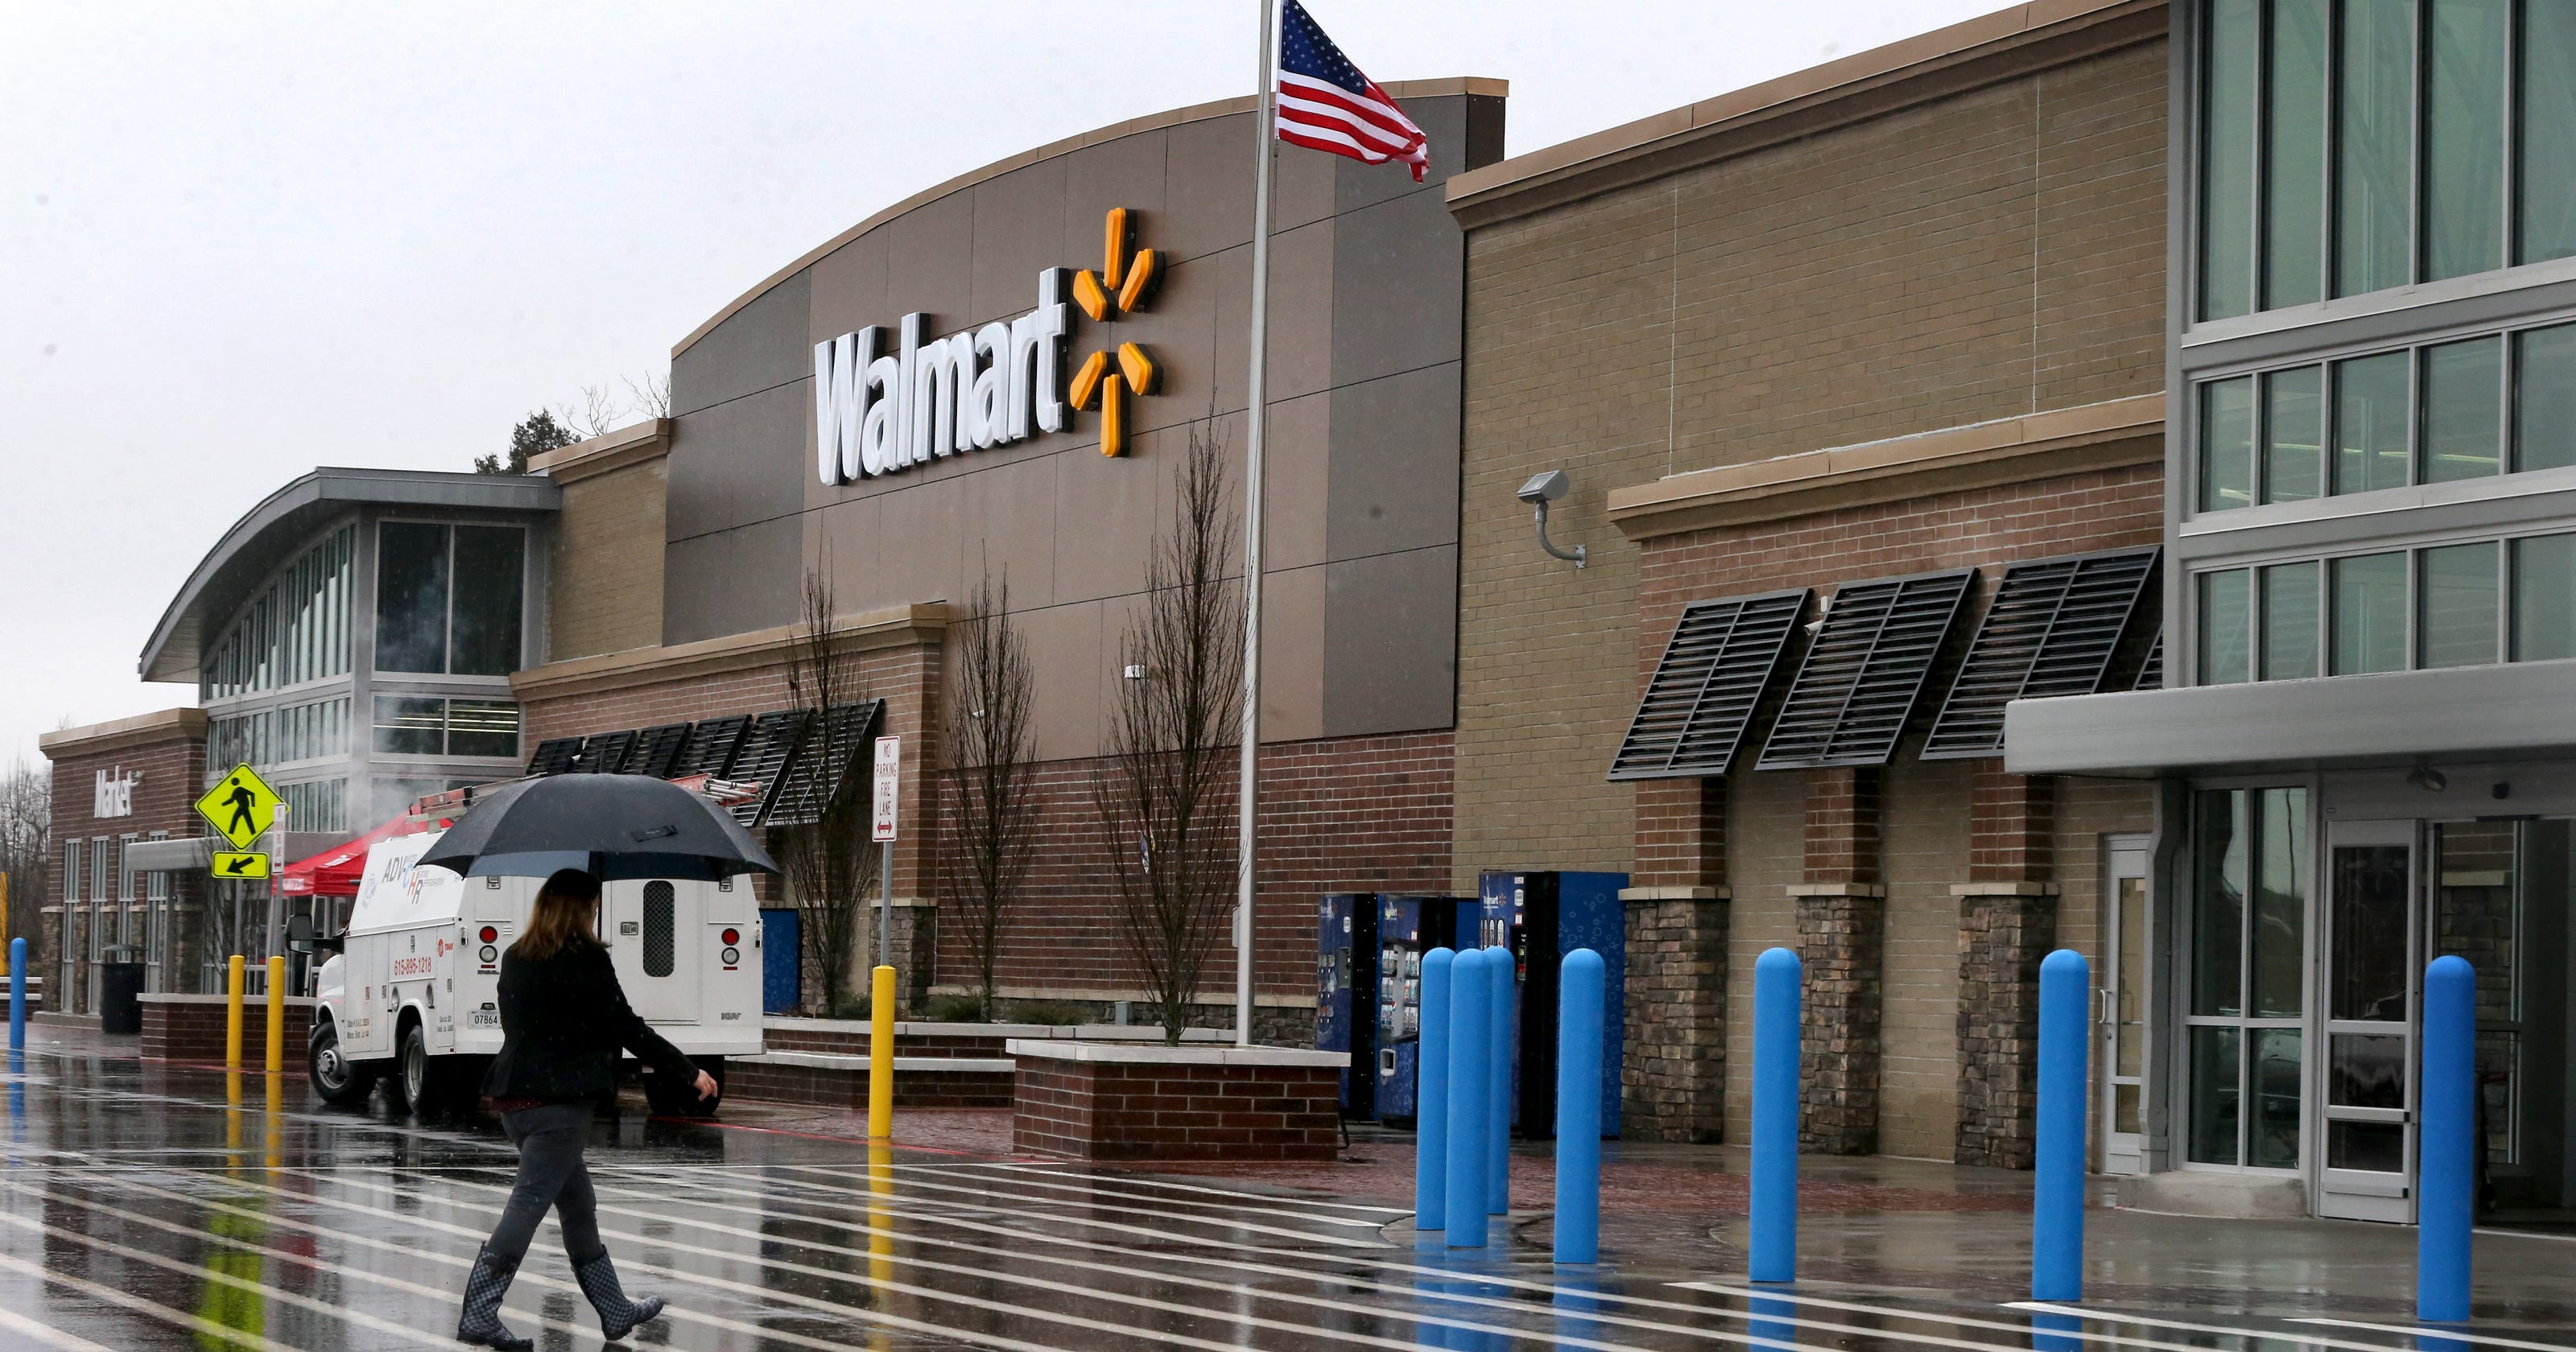 Wal-mart announces closings around country as stores open in Rutherford County